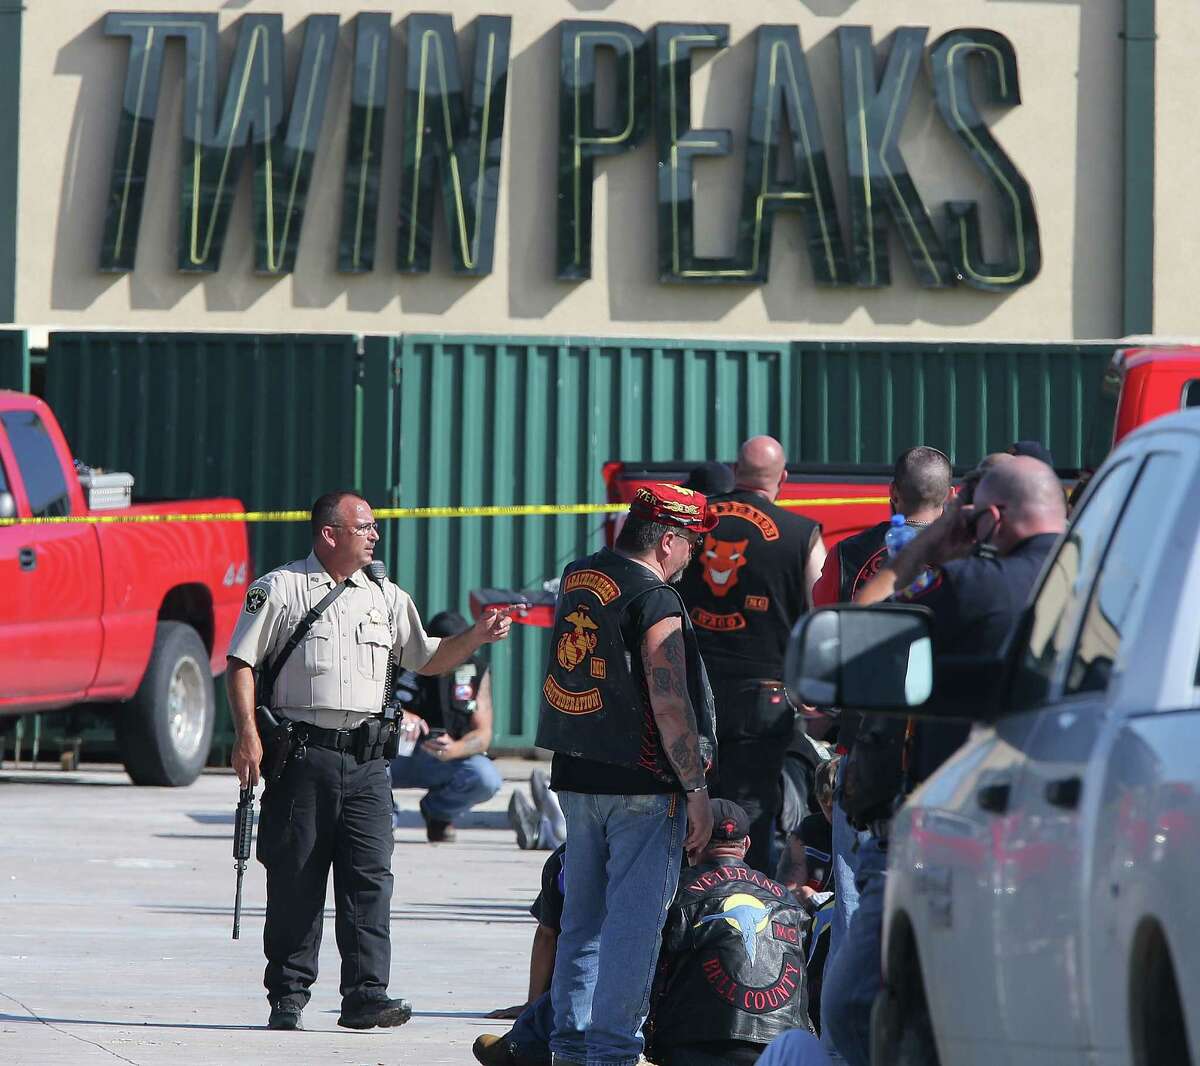 FILE - In this May 17, 2015 file photo, authorities investigate a shooting in the parking lot of the Twin Peaks restaurant in Waco, Texas. Police shot bikers in the deadly shootout that erupted last spring outside a Texas restaurant, though it remains unclear if their bullets caused any of the nine fatalities, according to evidence reviewed by The Associated Press. (AP Photo/Jerry Larson, File)